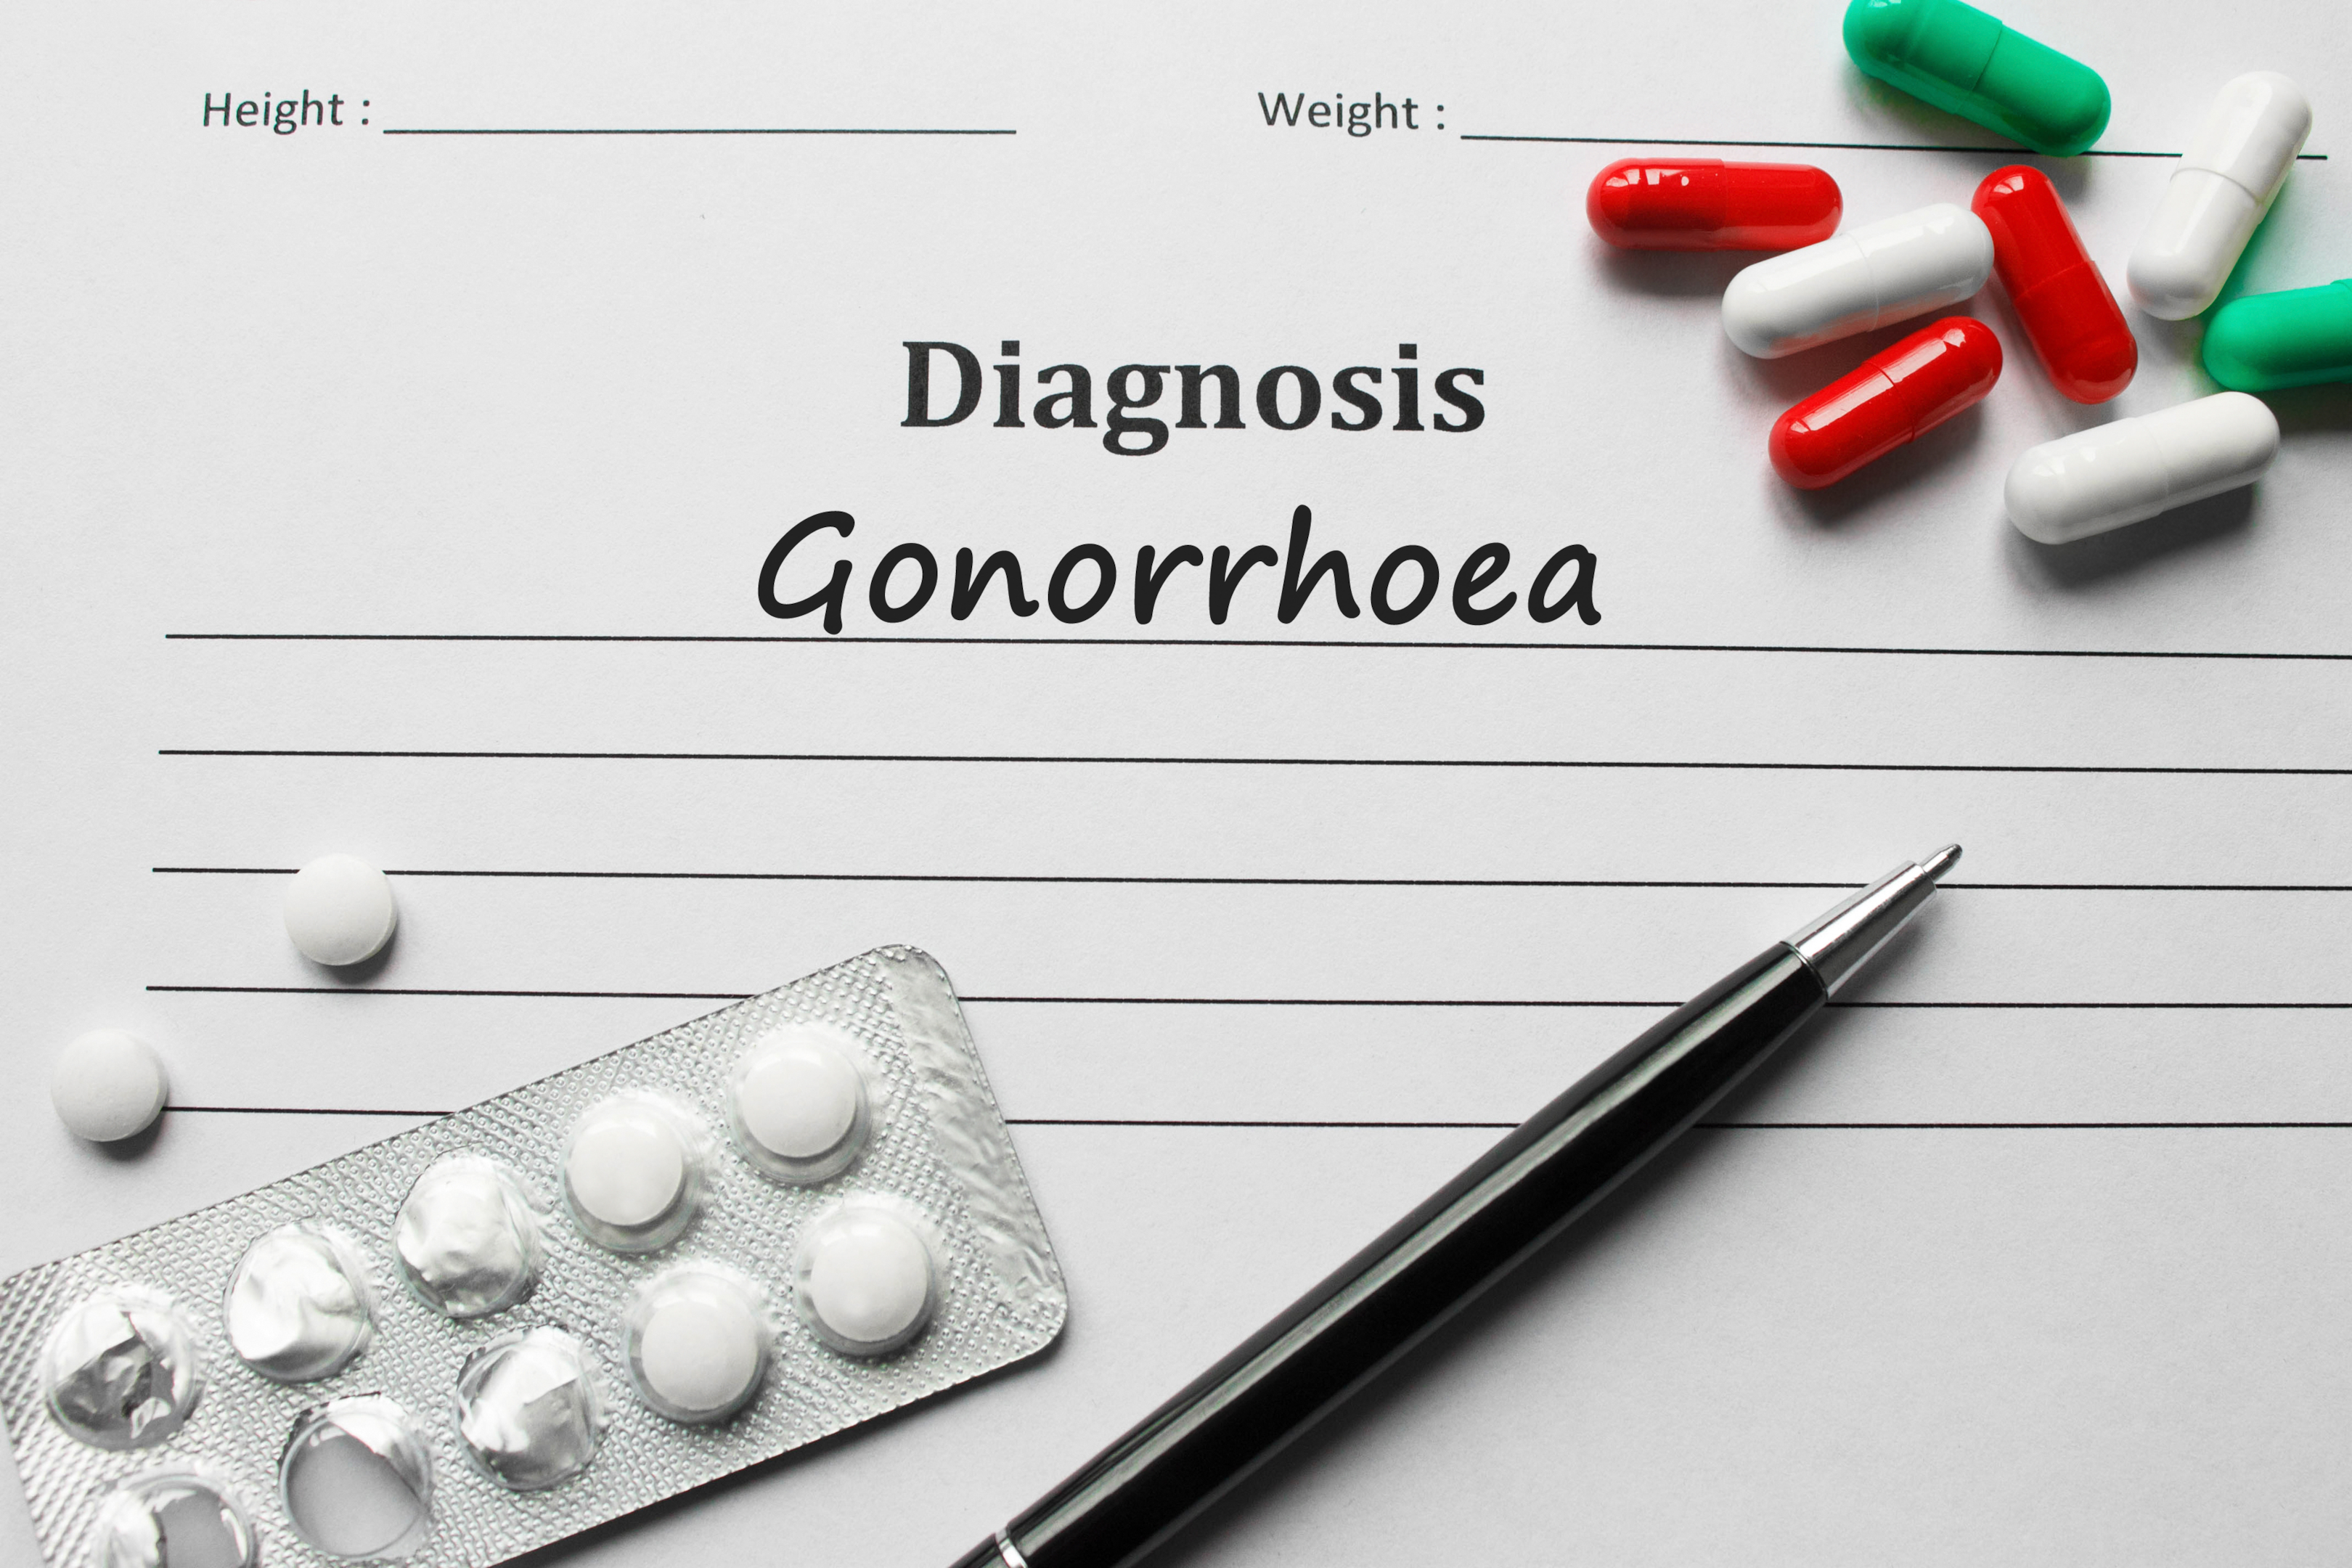 oral sex causing a gonorrhoea infection